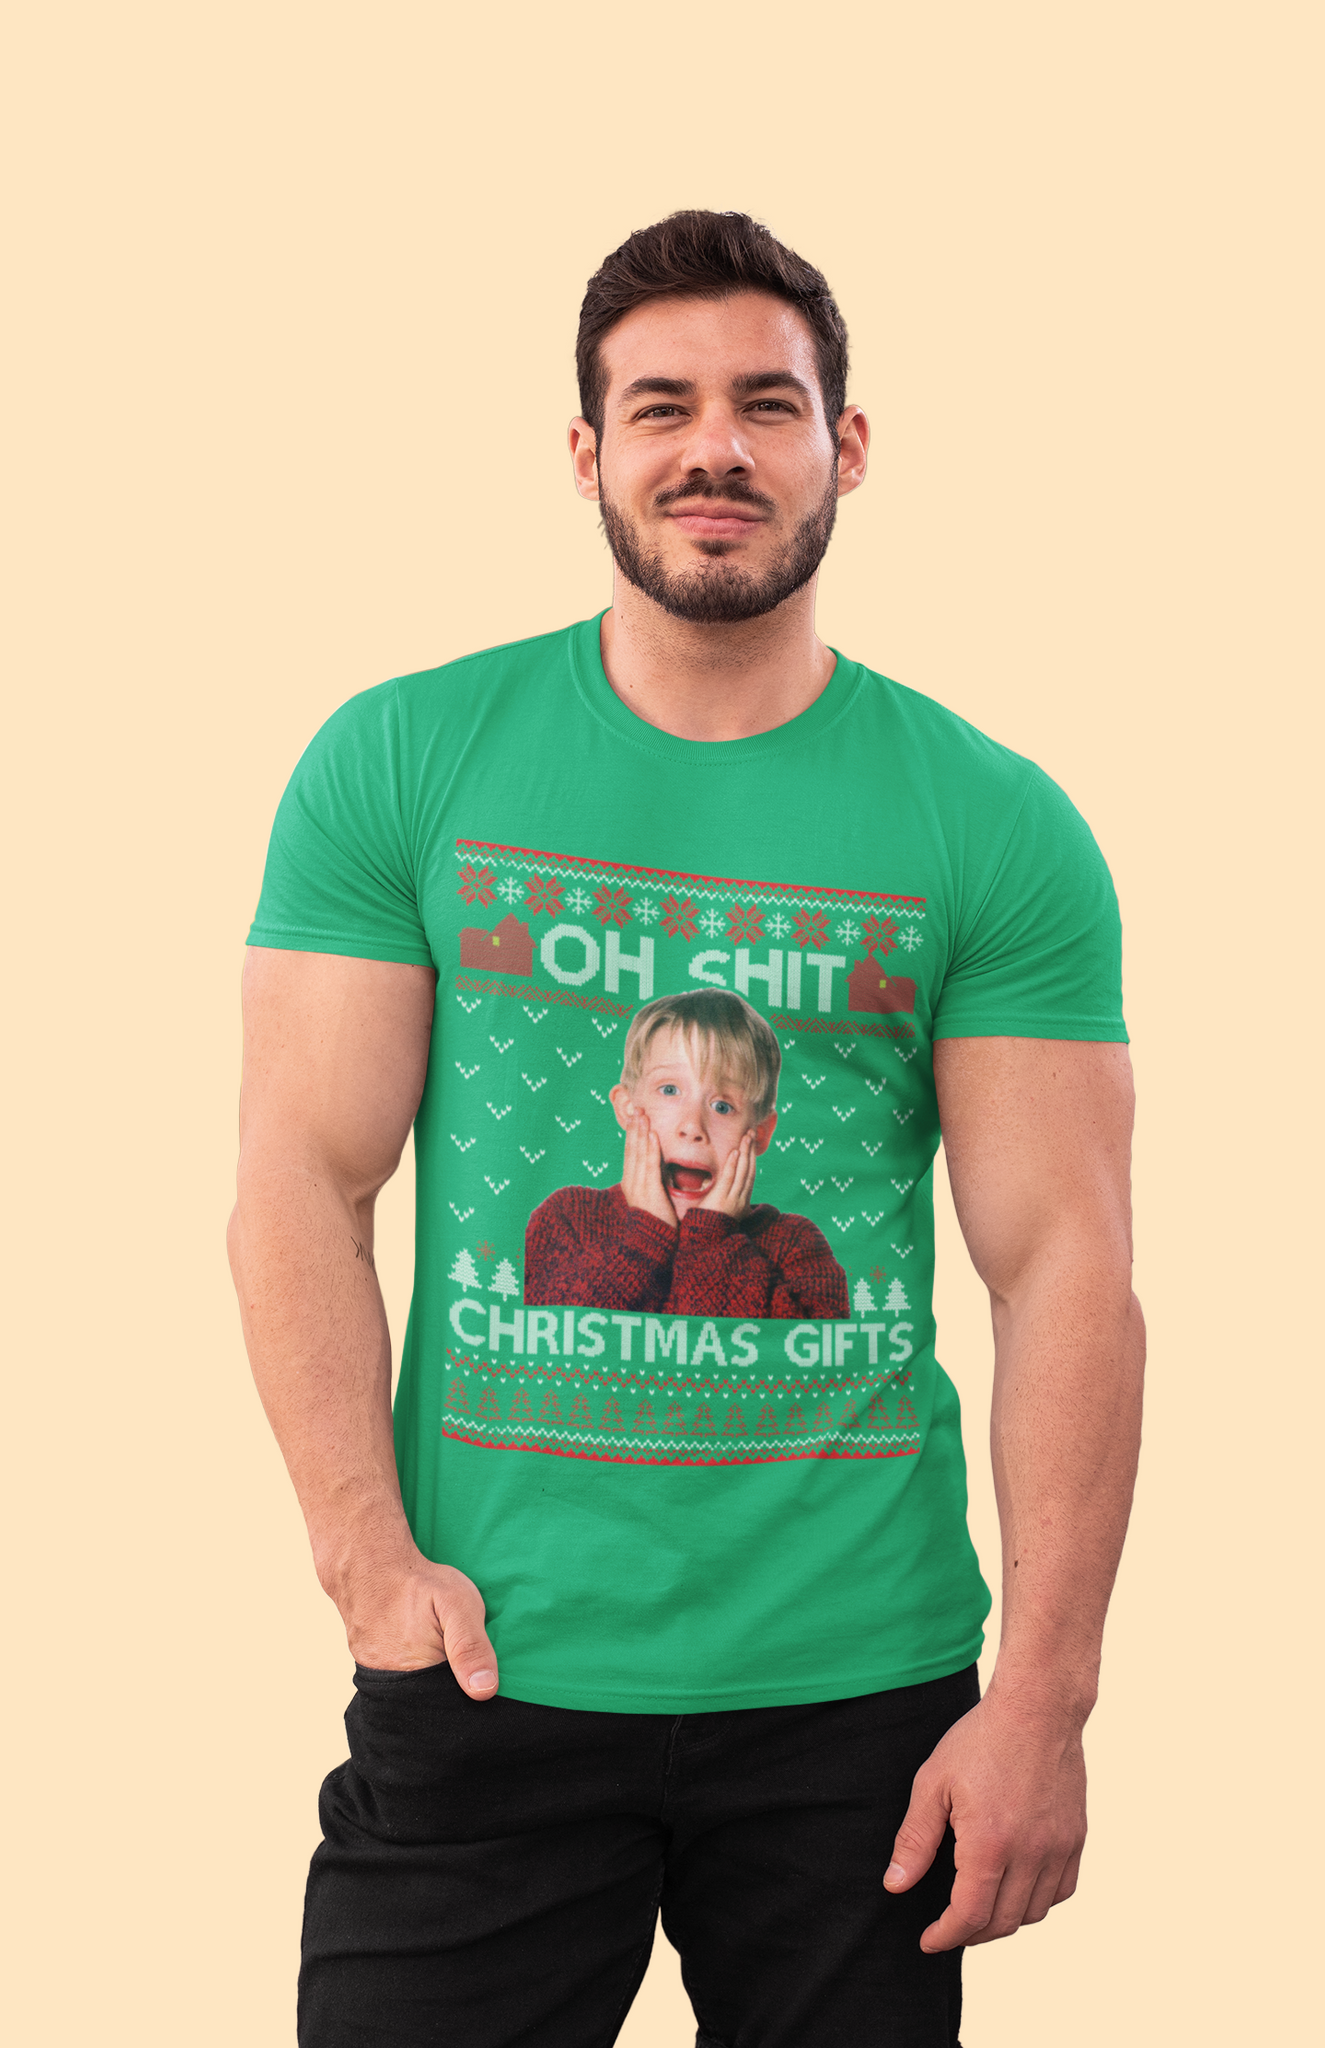 Home Alone Ugly Sweater Shirt, Oh Shit Christmas Gifts Tshirt, Kevin McCallister T Shirt, Christmas Gifts